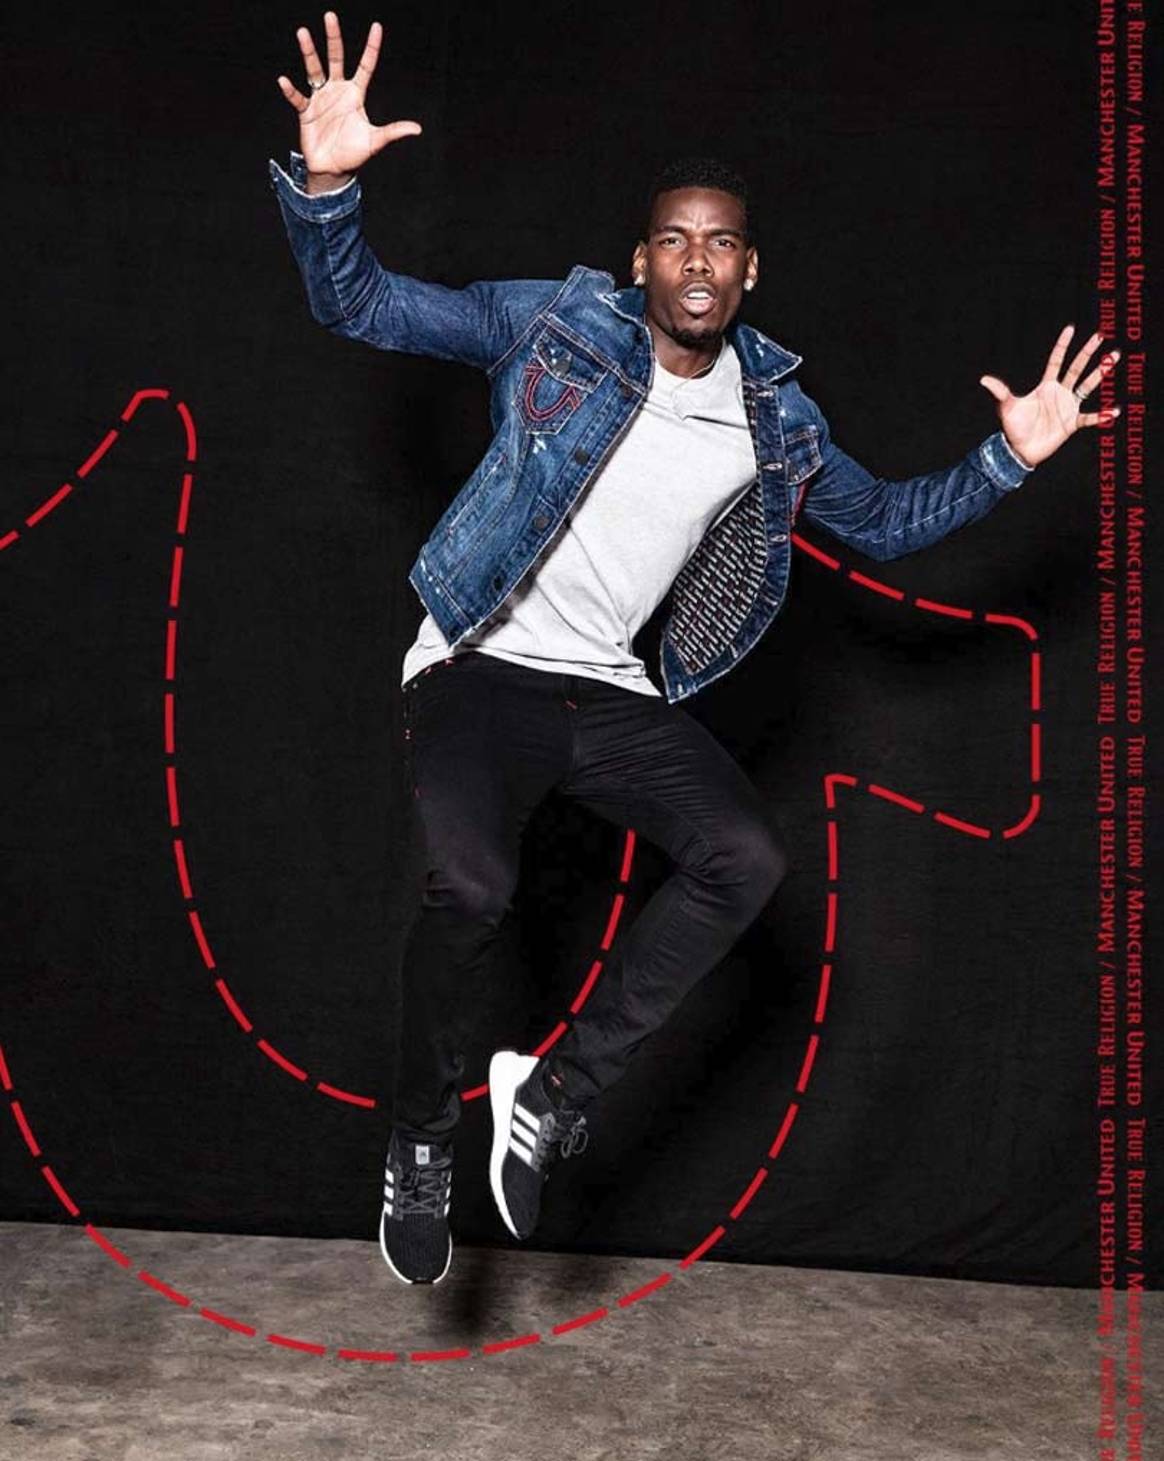 Manchester United and True Religion launch denim collection